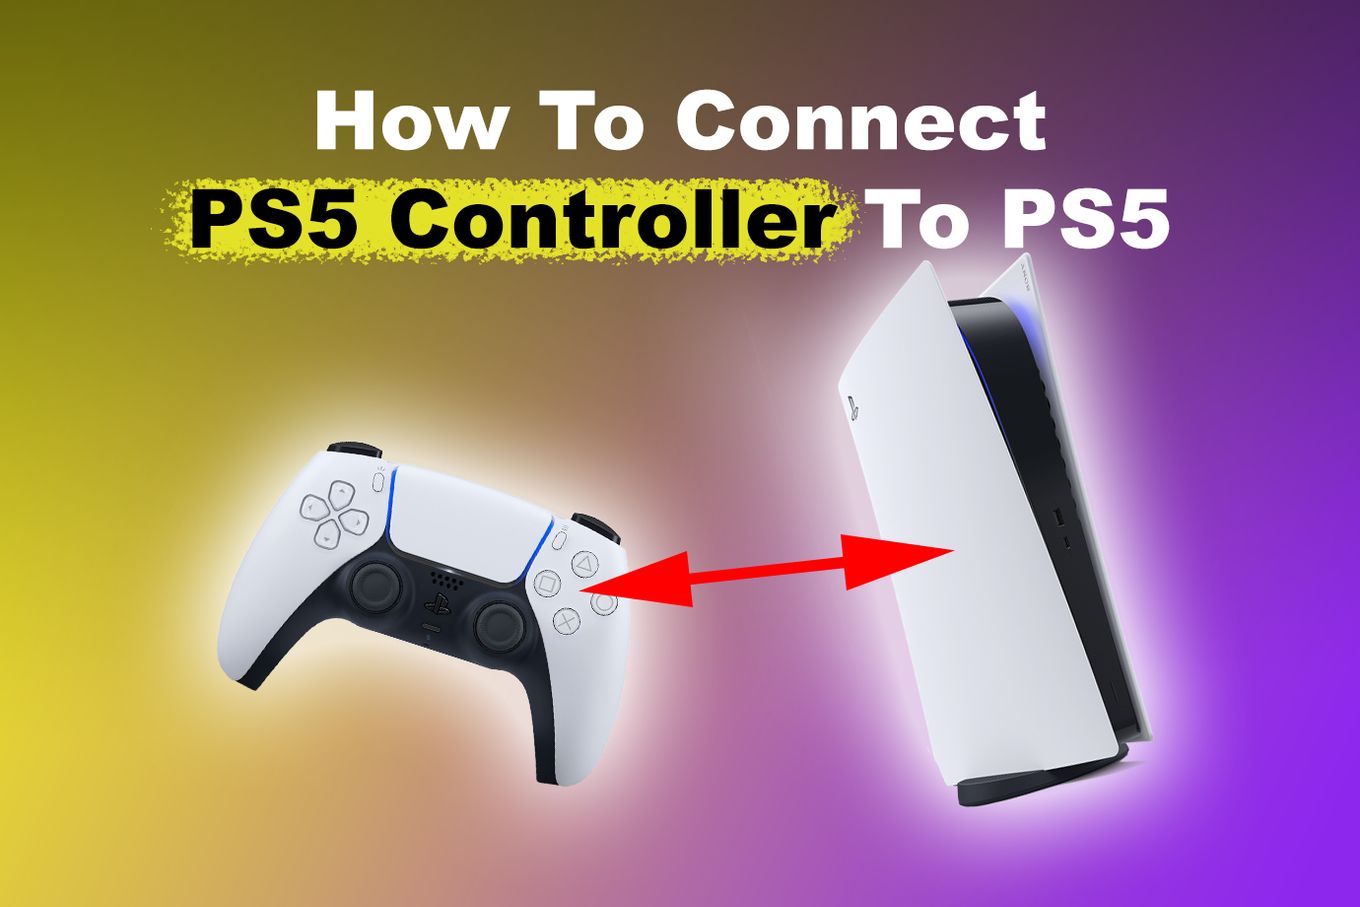 How To Connect PS5 Controller